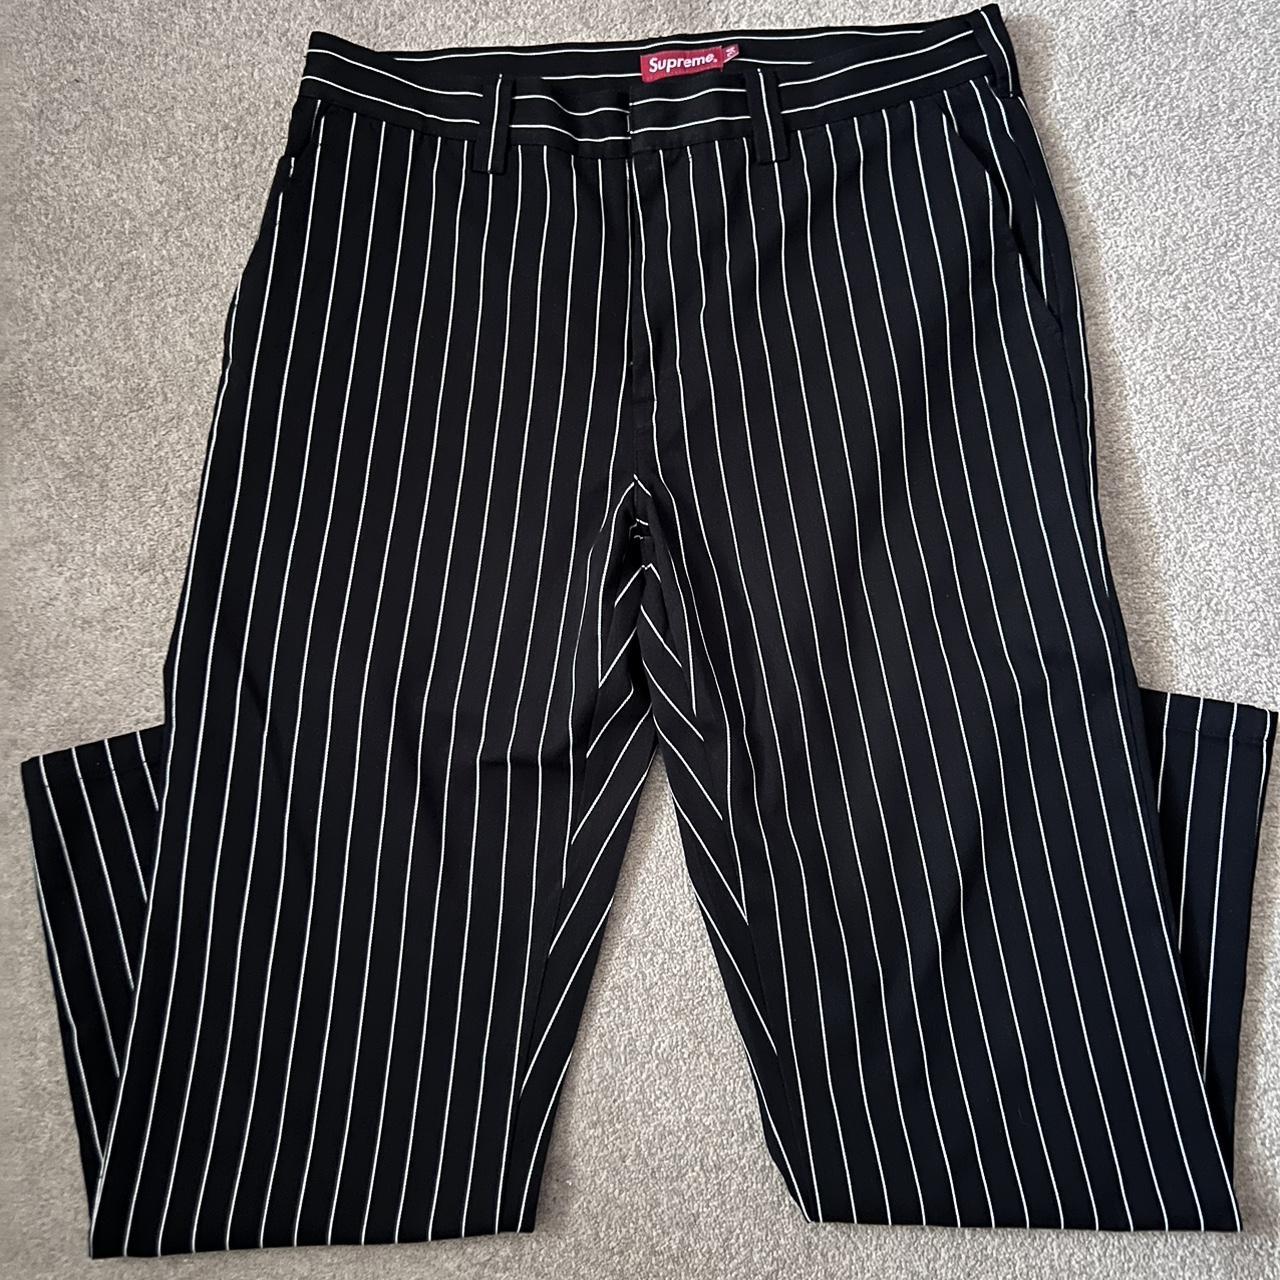 Supreme Men's Black and White Trousers | Depop